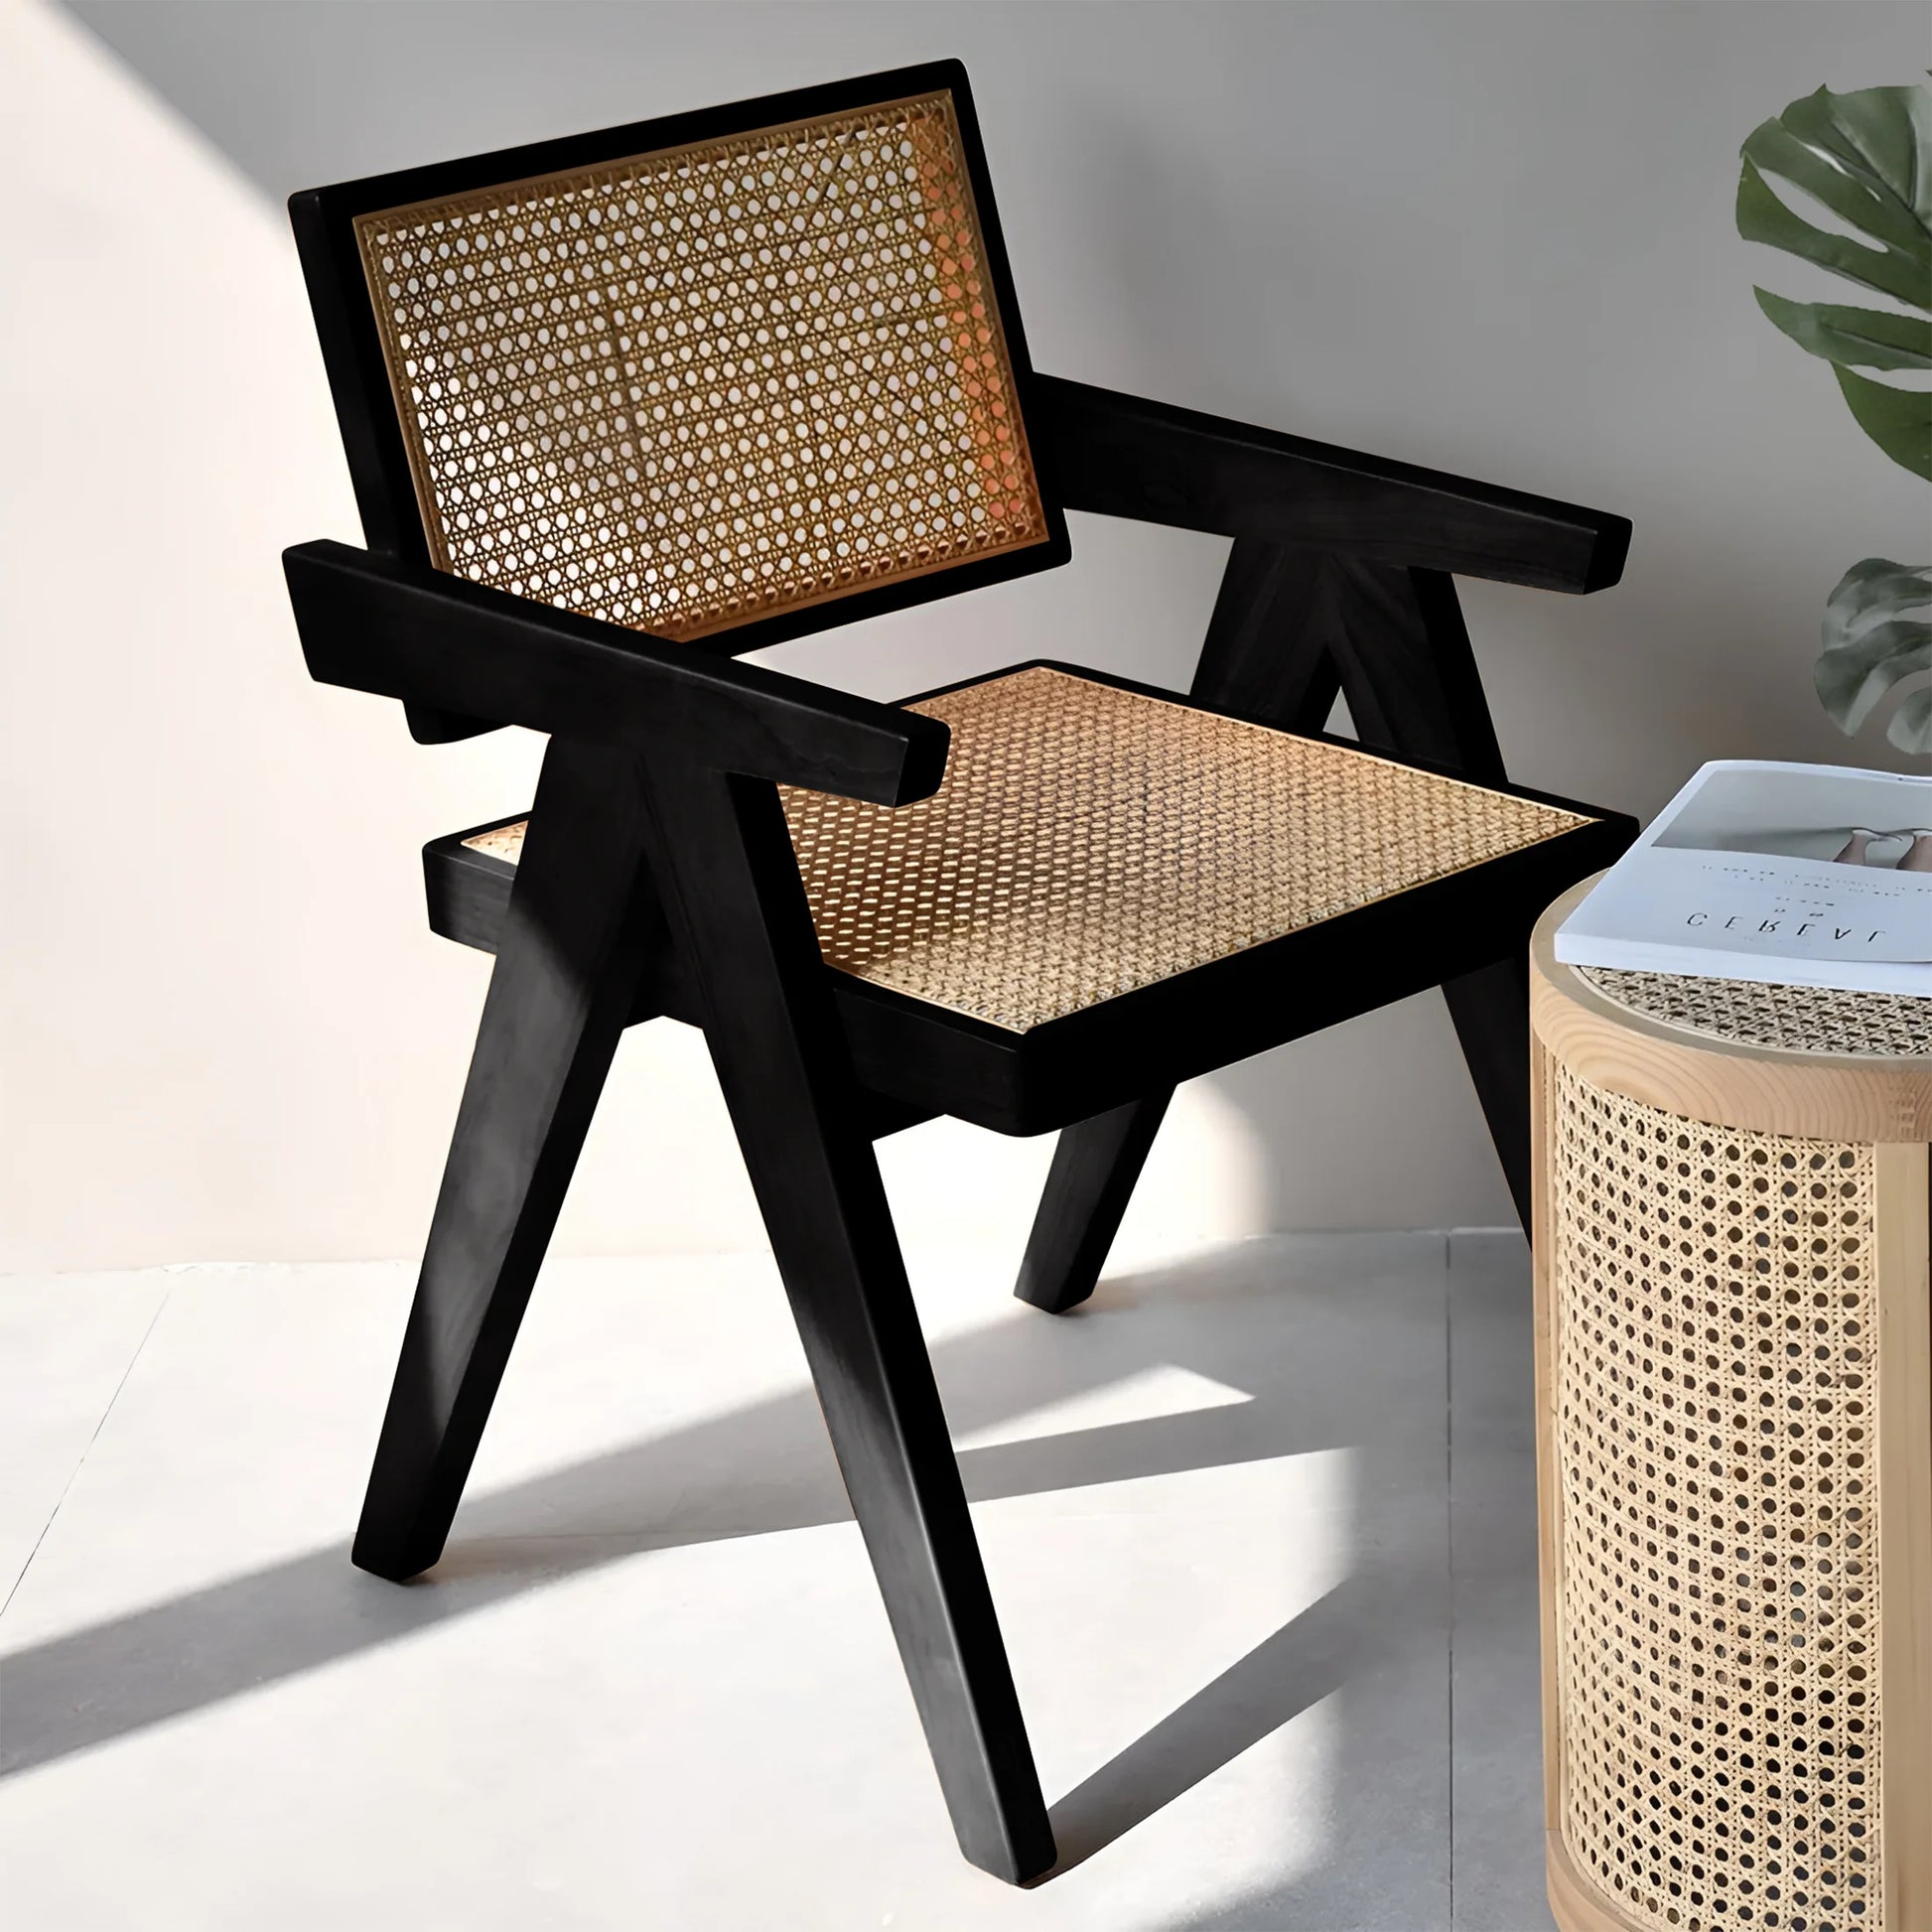 Arthia Designs - Chandigarh Solid Wood Rattan Dining Chair - Review